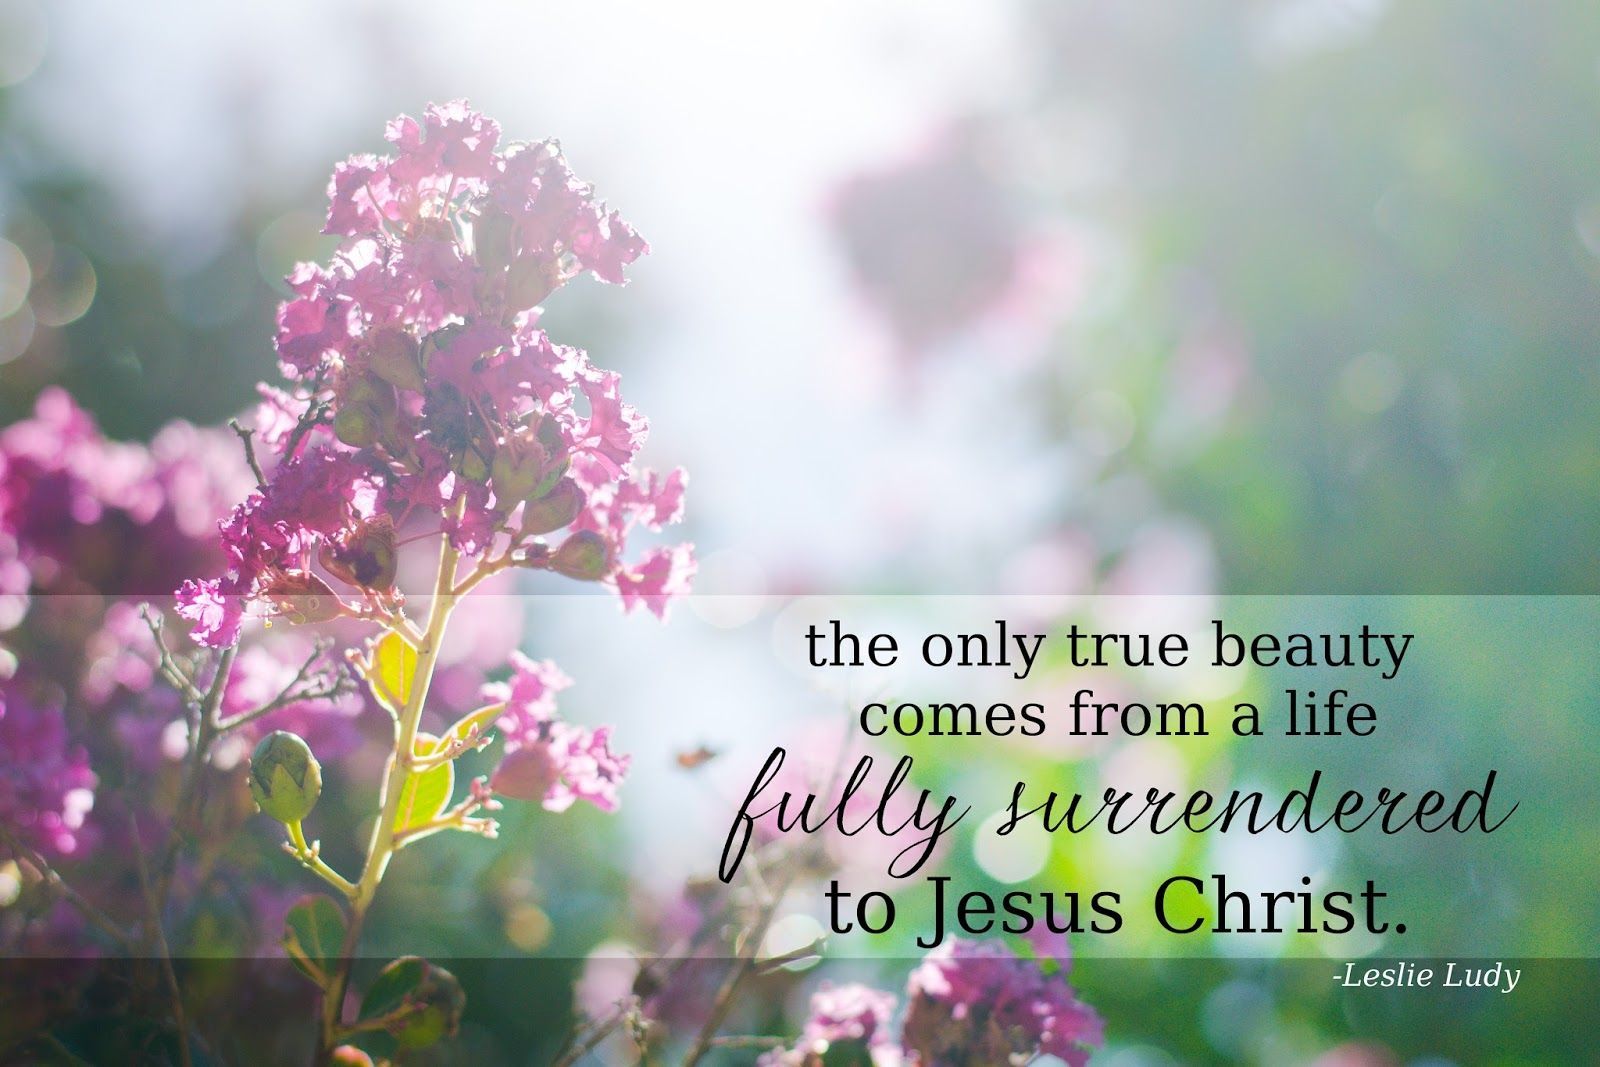 KJV Bible Wallpaper. Bible quotes about beauty, Beauty quotes